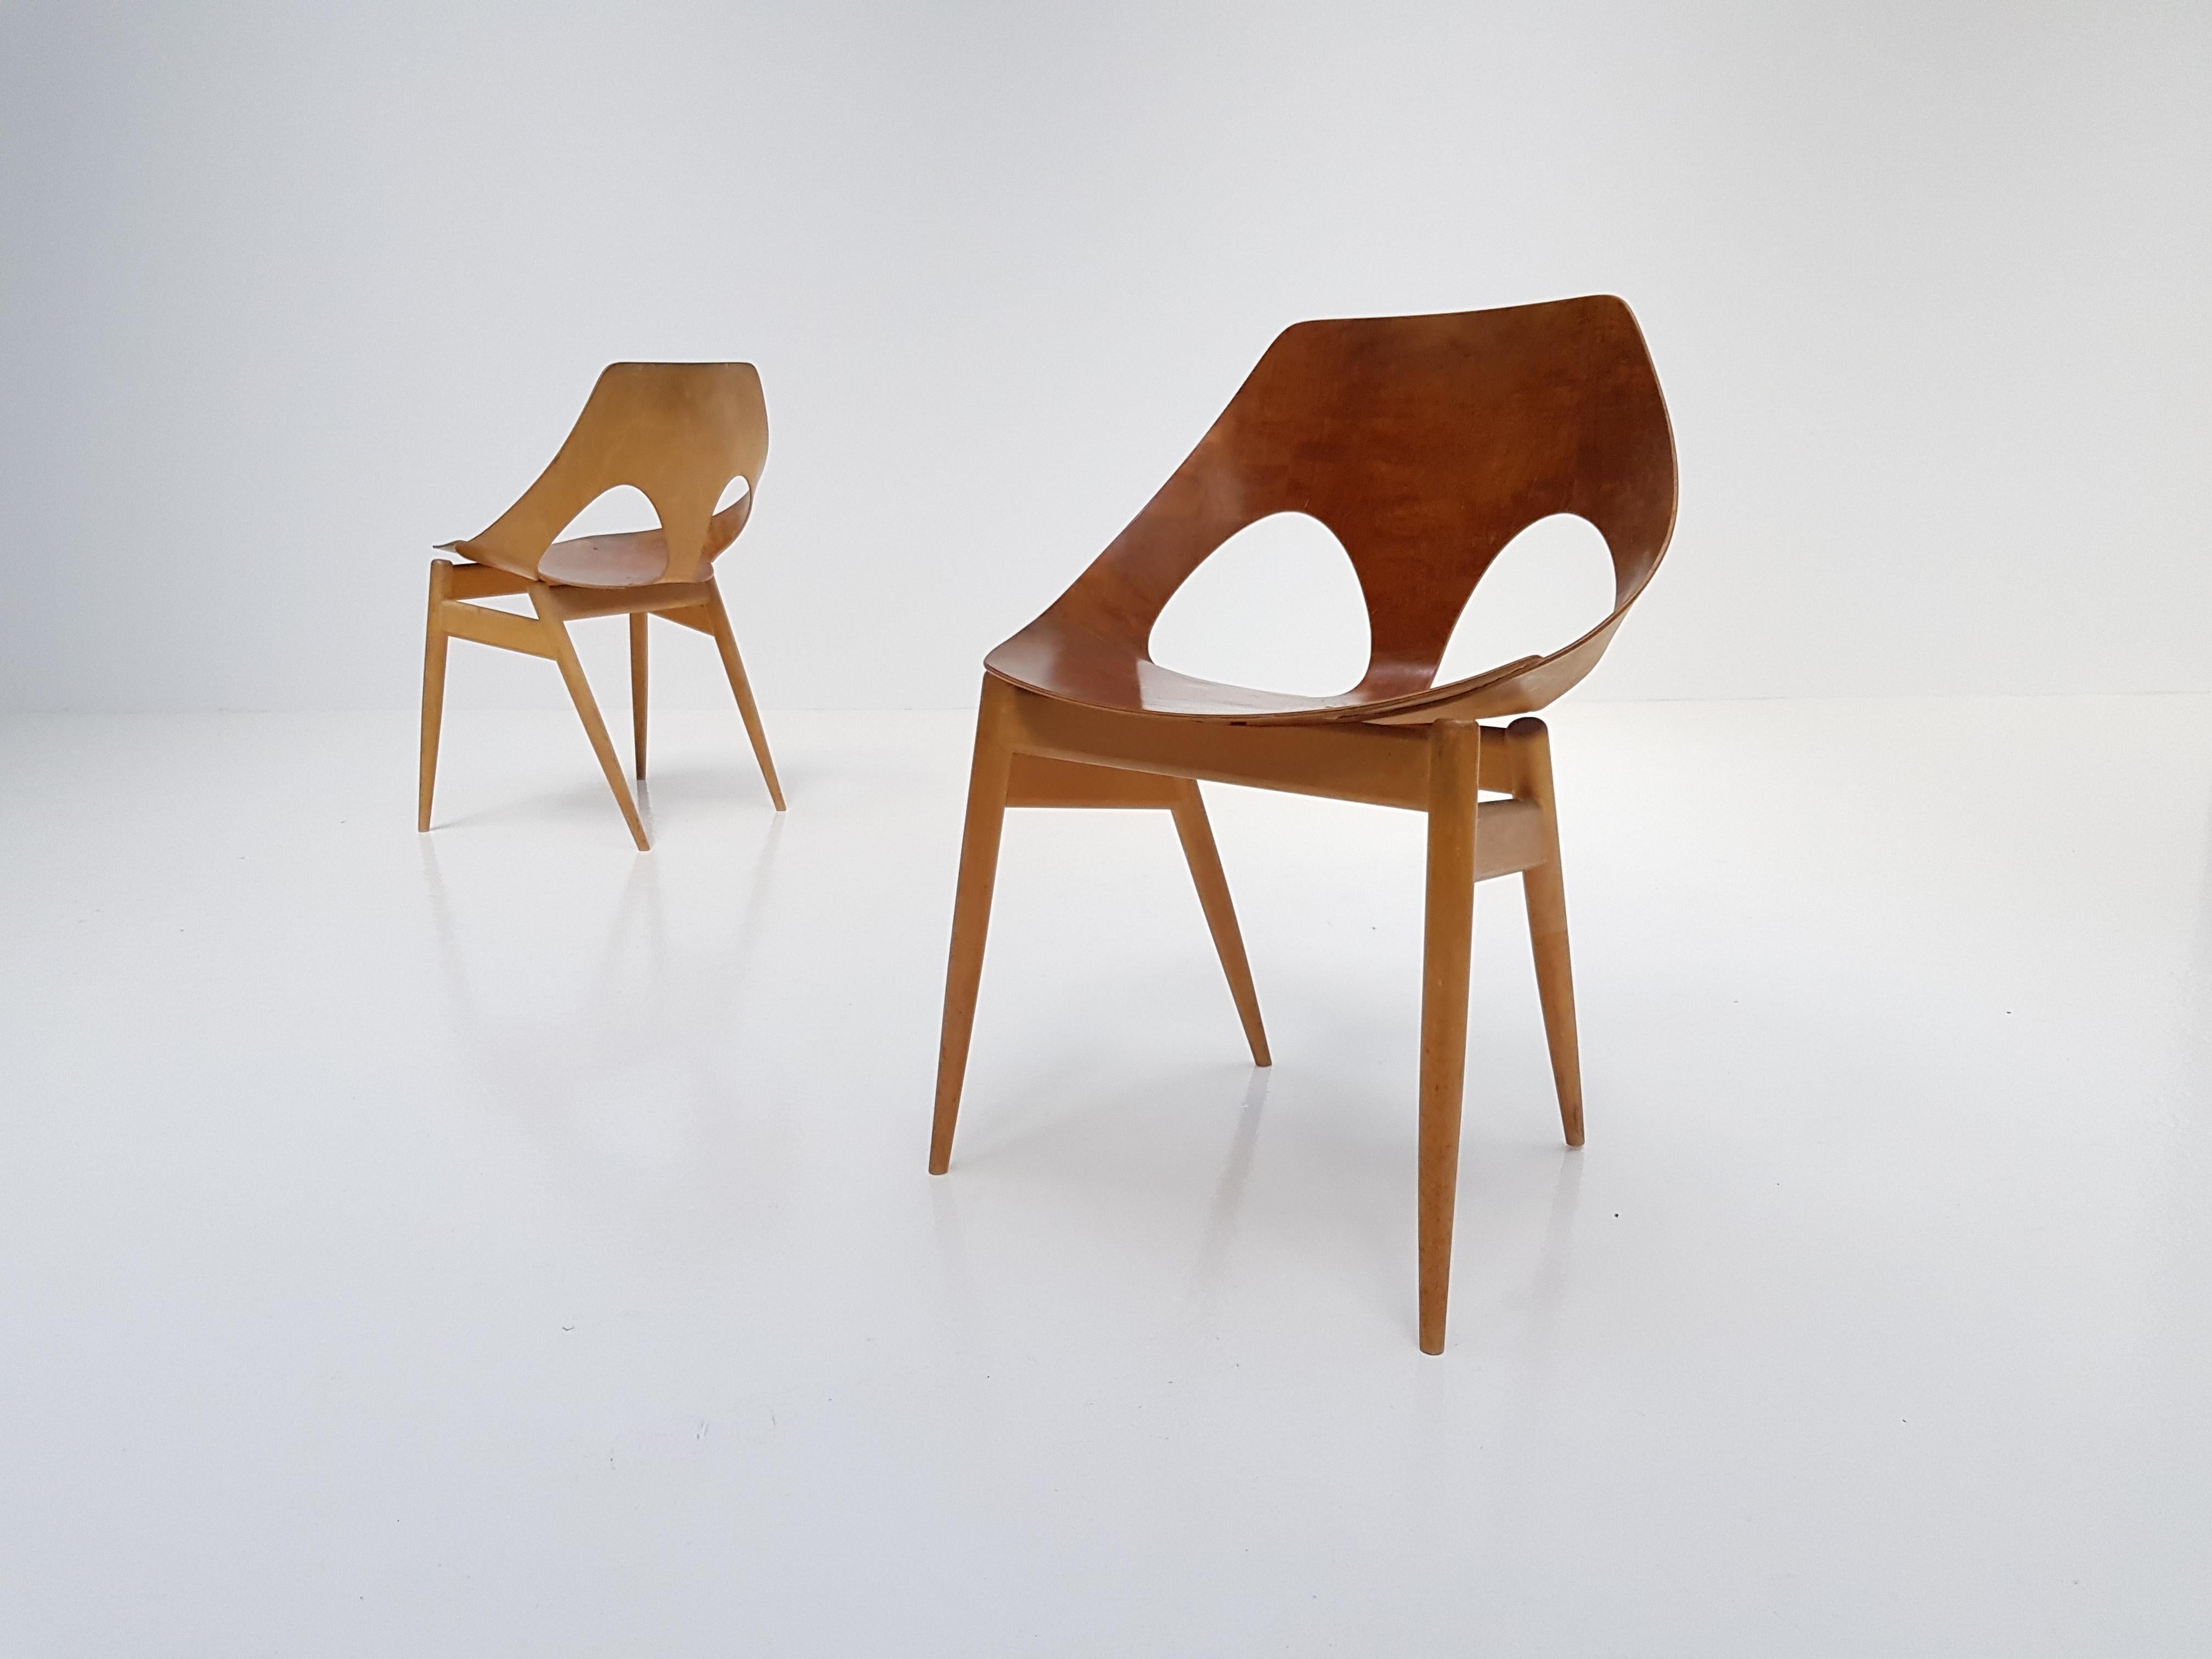 A pair of 'Jason' chair, these iconic chairs were designed in the 1950s by Danish designer Carl Jacobs and manufactured by Kandya.

The seat and back of the chair are folded from a single sheet of flexible plywood that wraps around the chair and